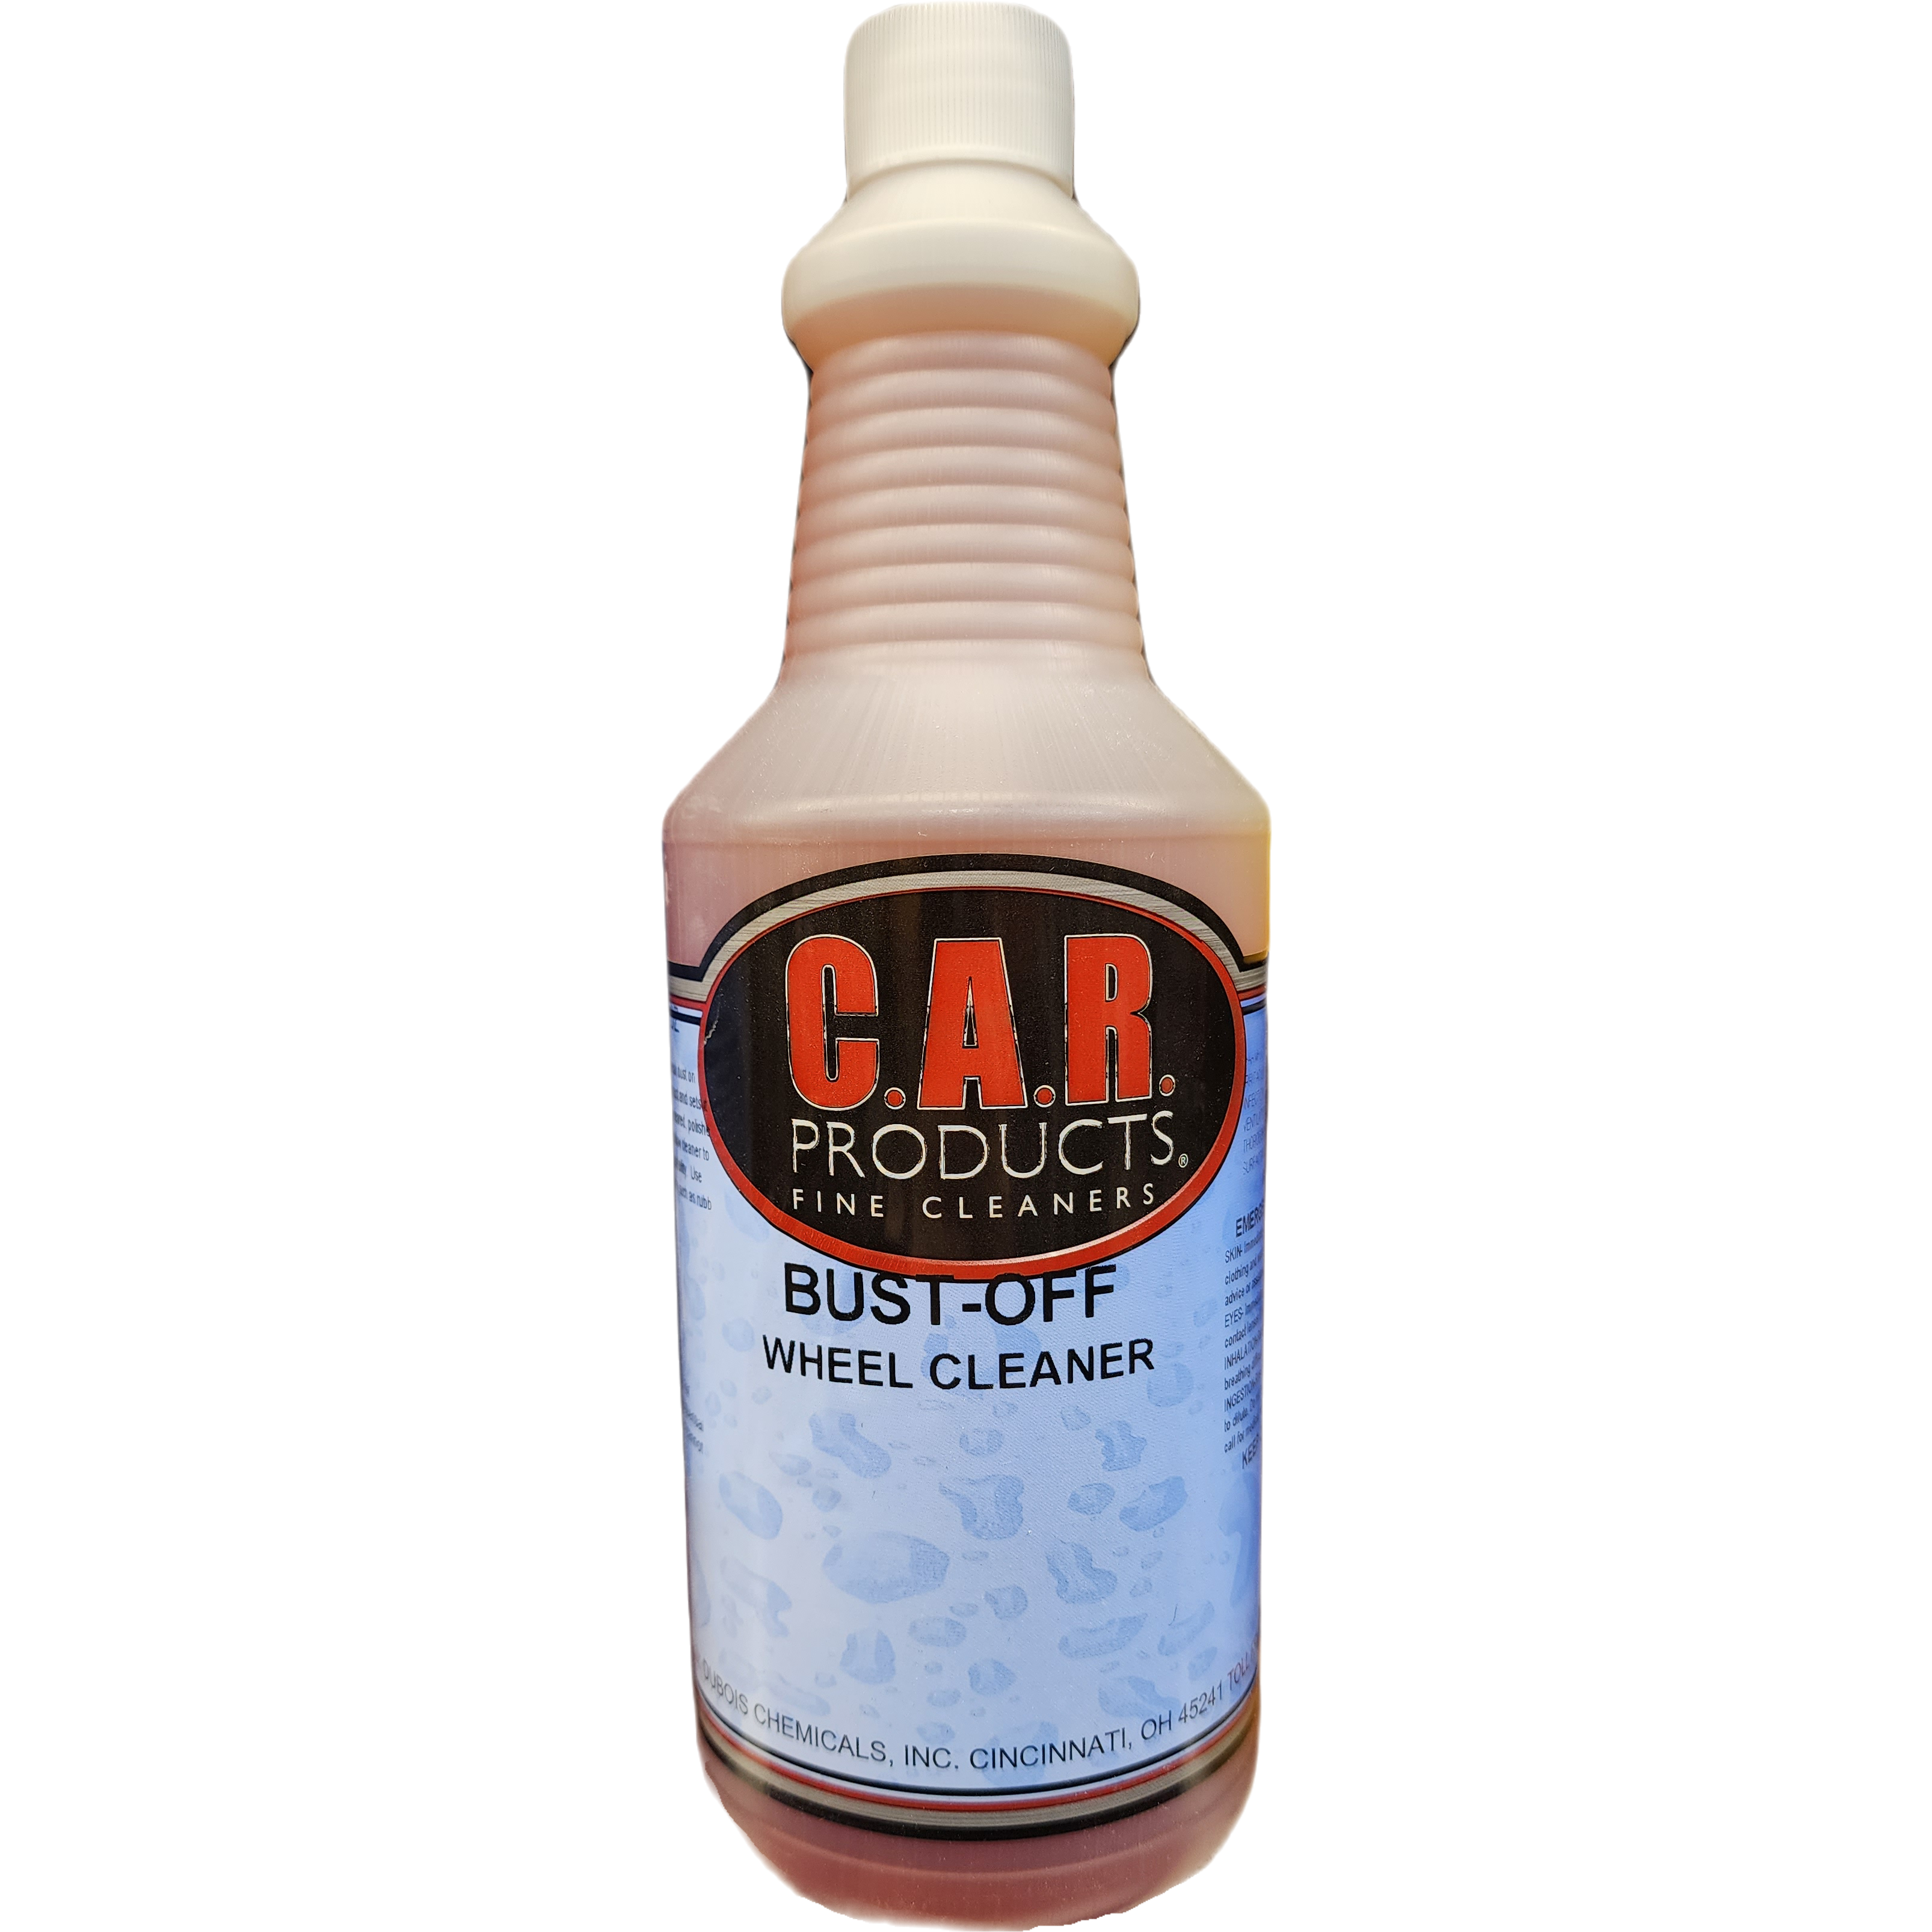 XCP CAR-13632 CAR Products Bust-Off Wheel Cleaner (1 qt)